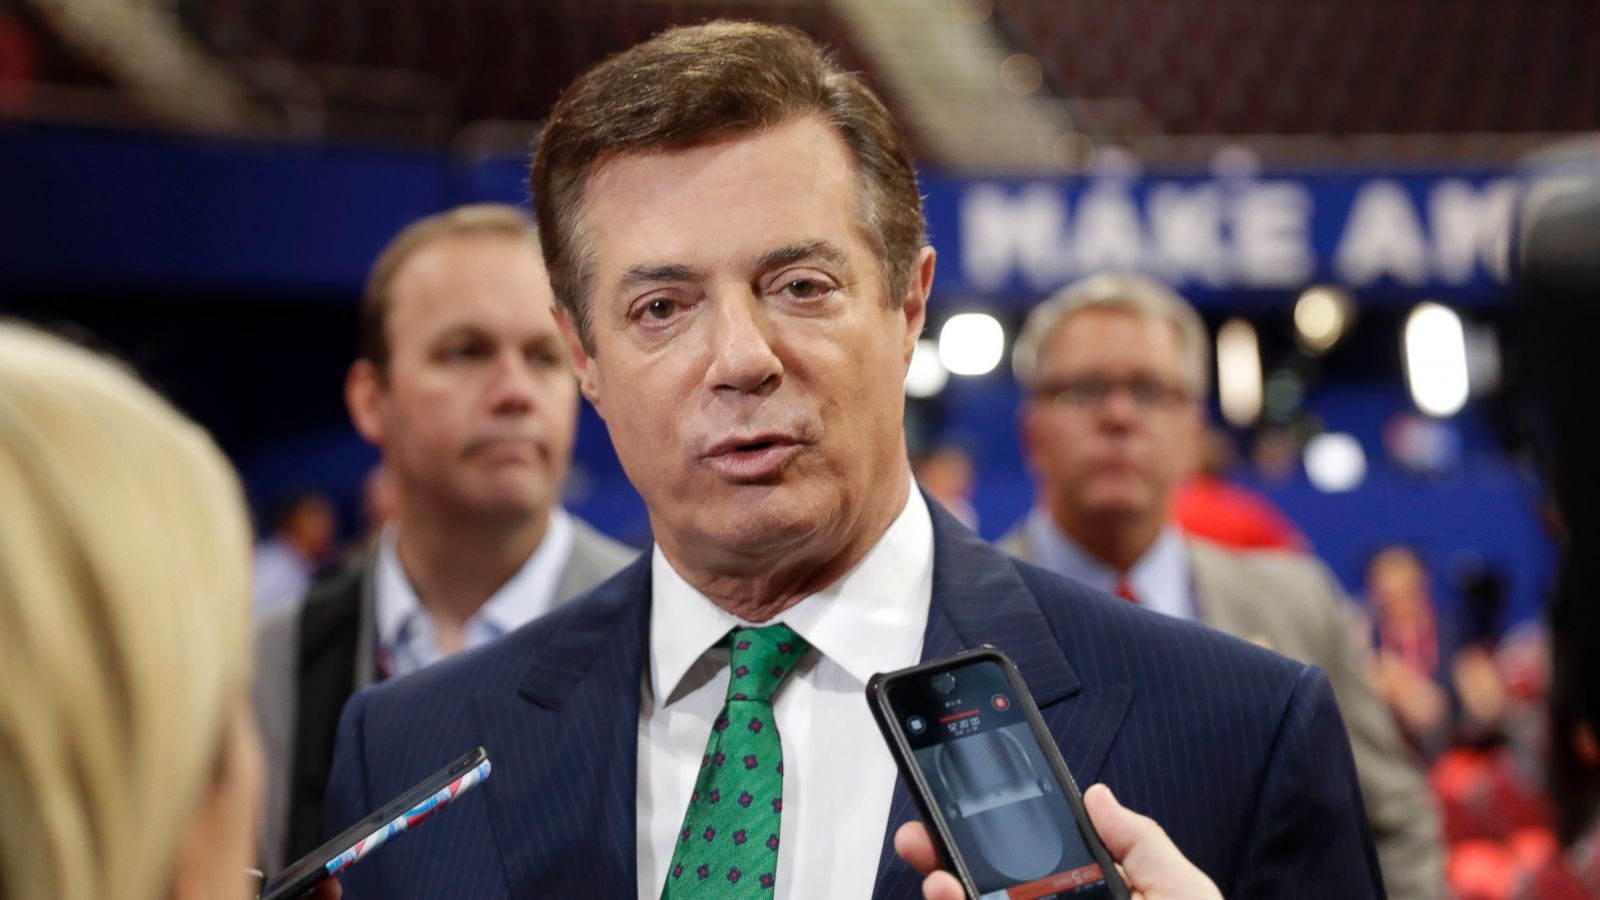 Trump Campaign Chair Manafort Obama Should Be Ashamed At What Is